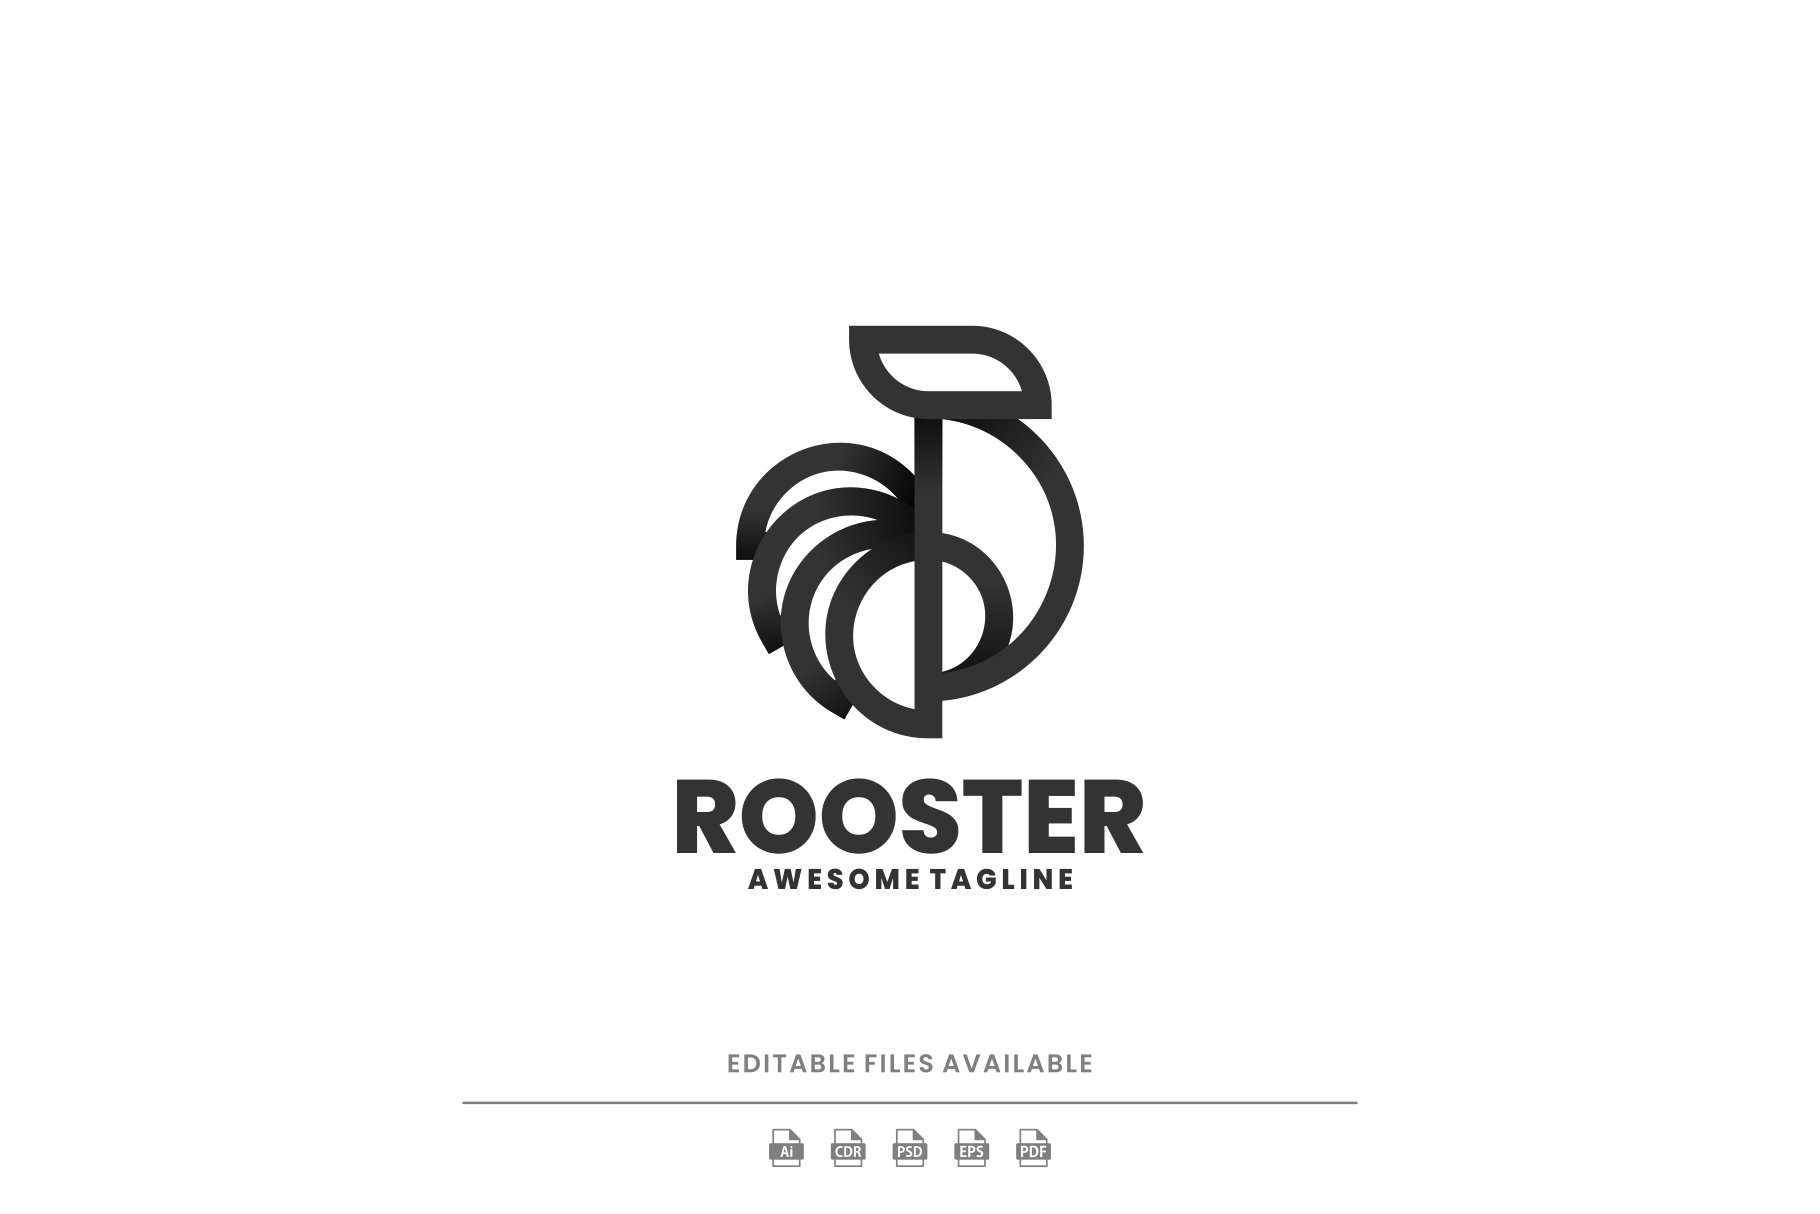 Rooster Line Art Logo cover image.